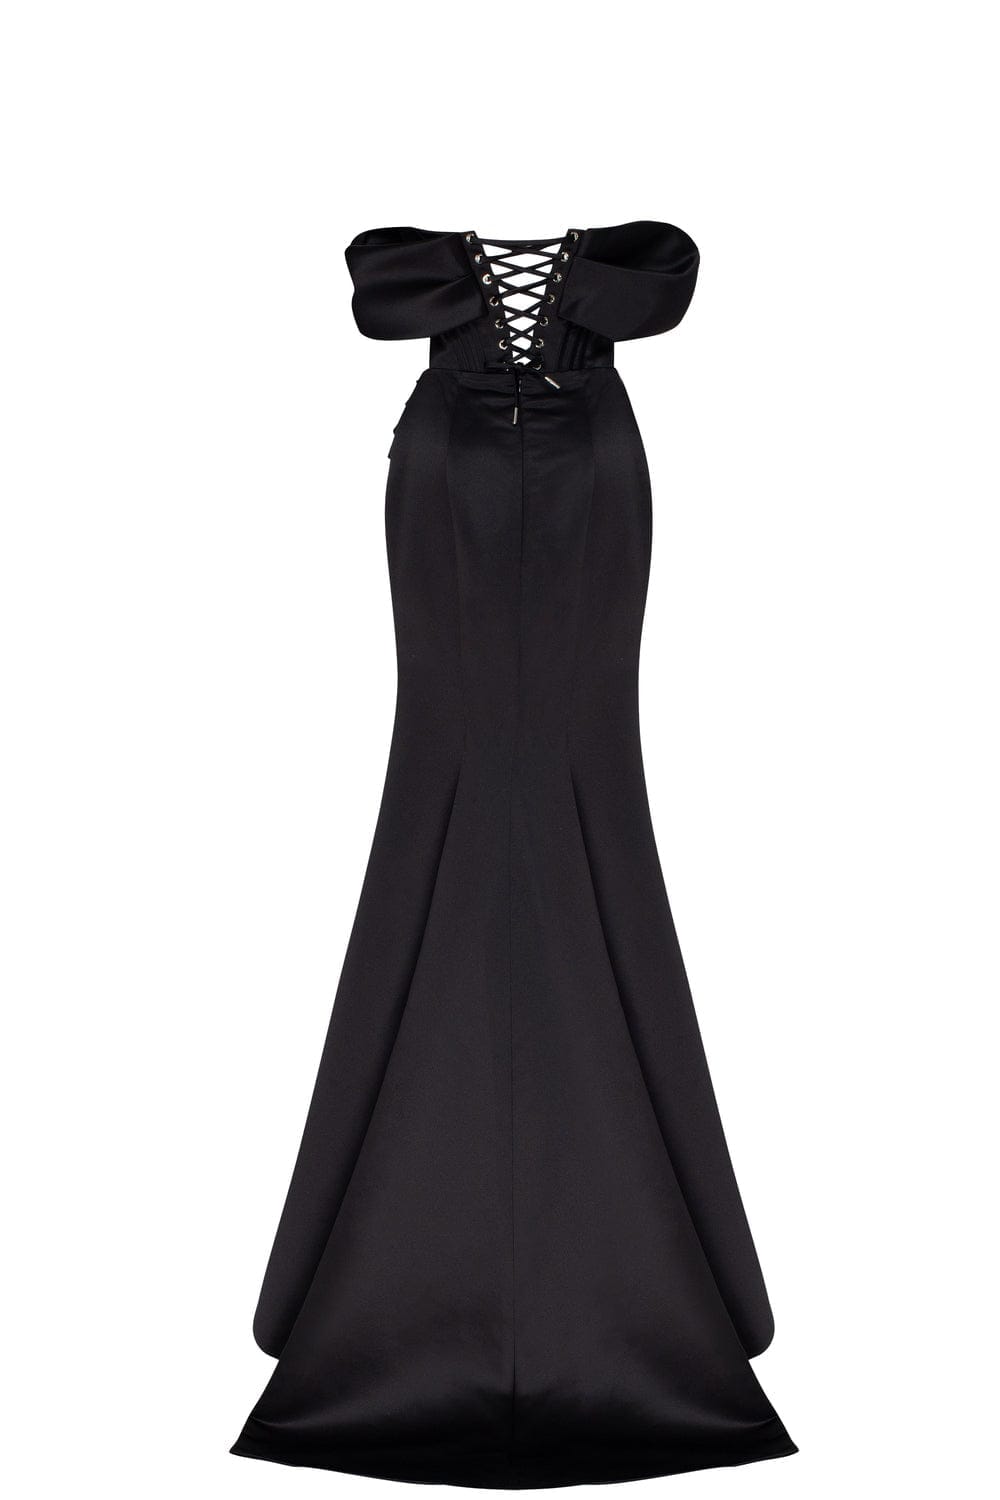 Black Princess strapless gown with thigh slit - Milla